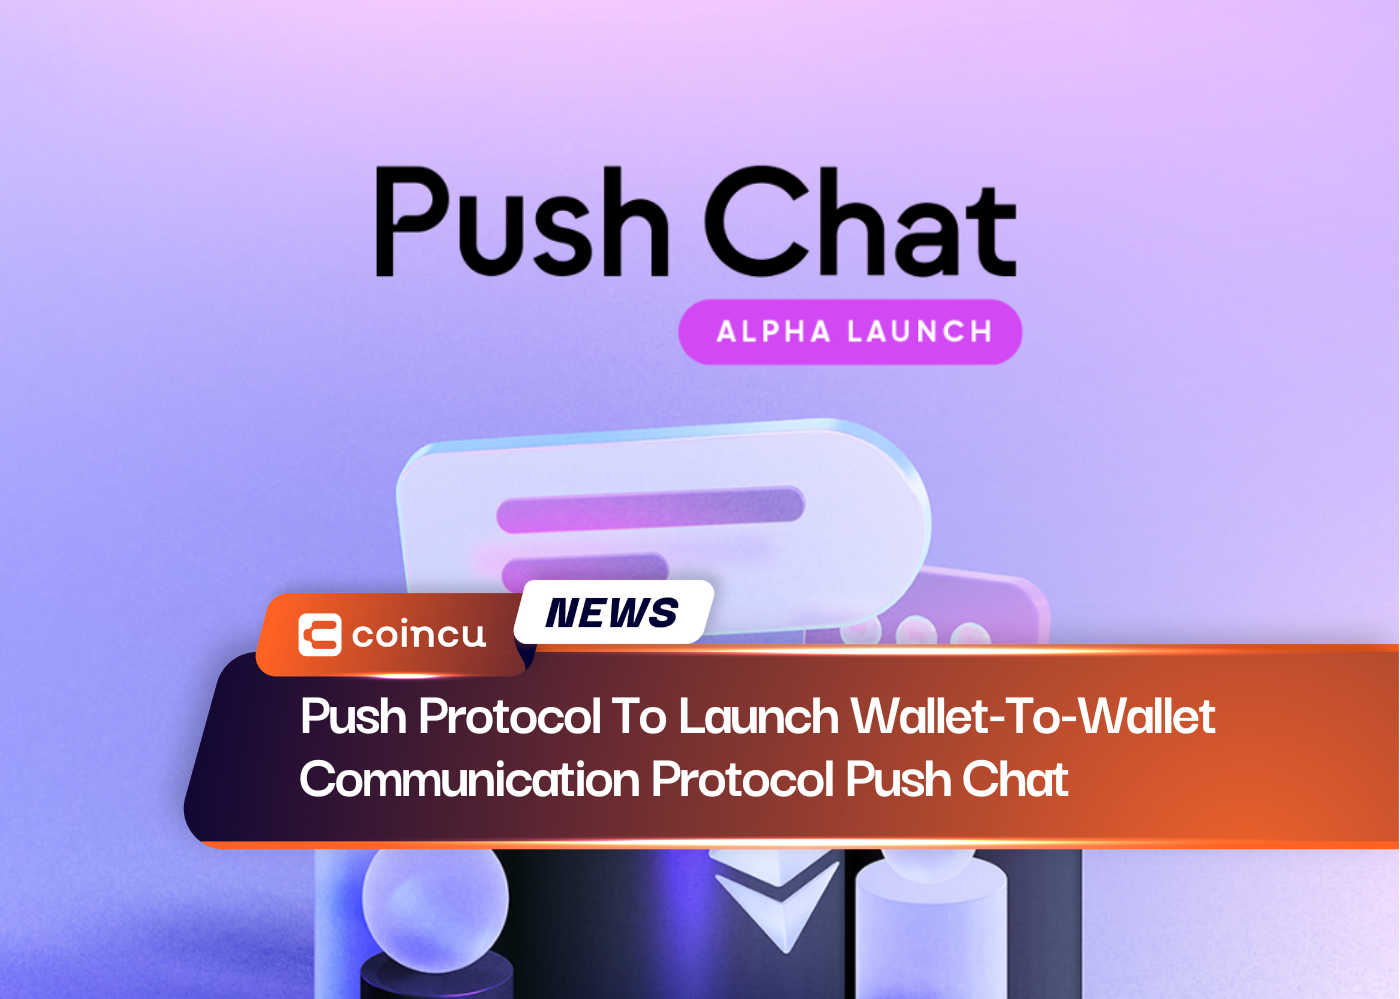 Push Protocol To Launch Wallet-To-Wallet Communication Protocol Push Chat